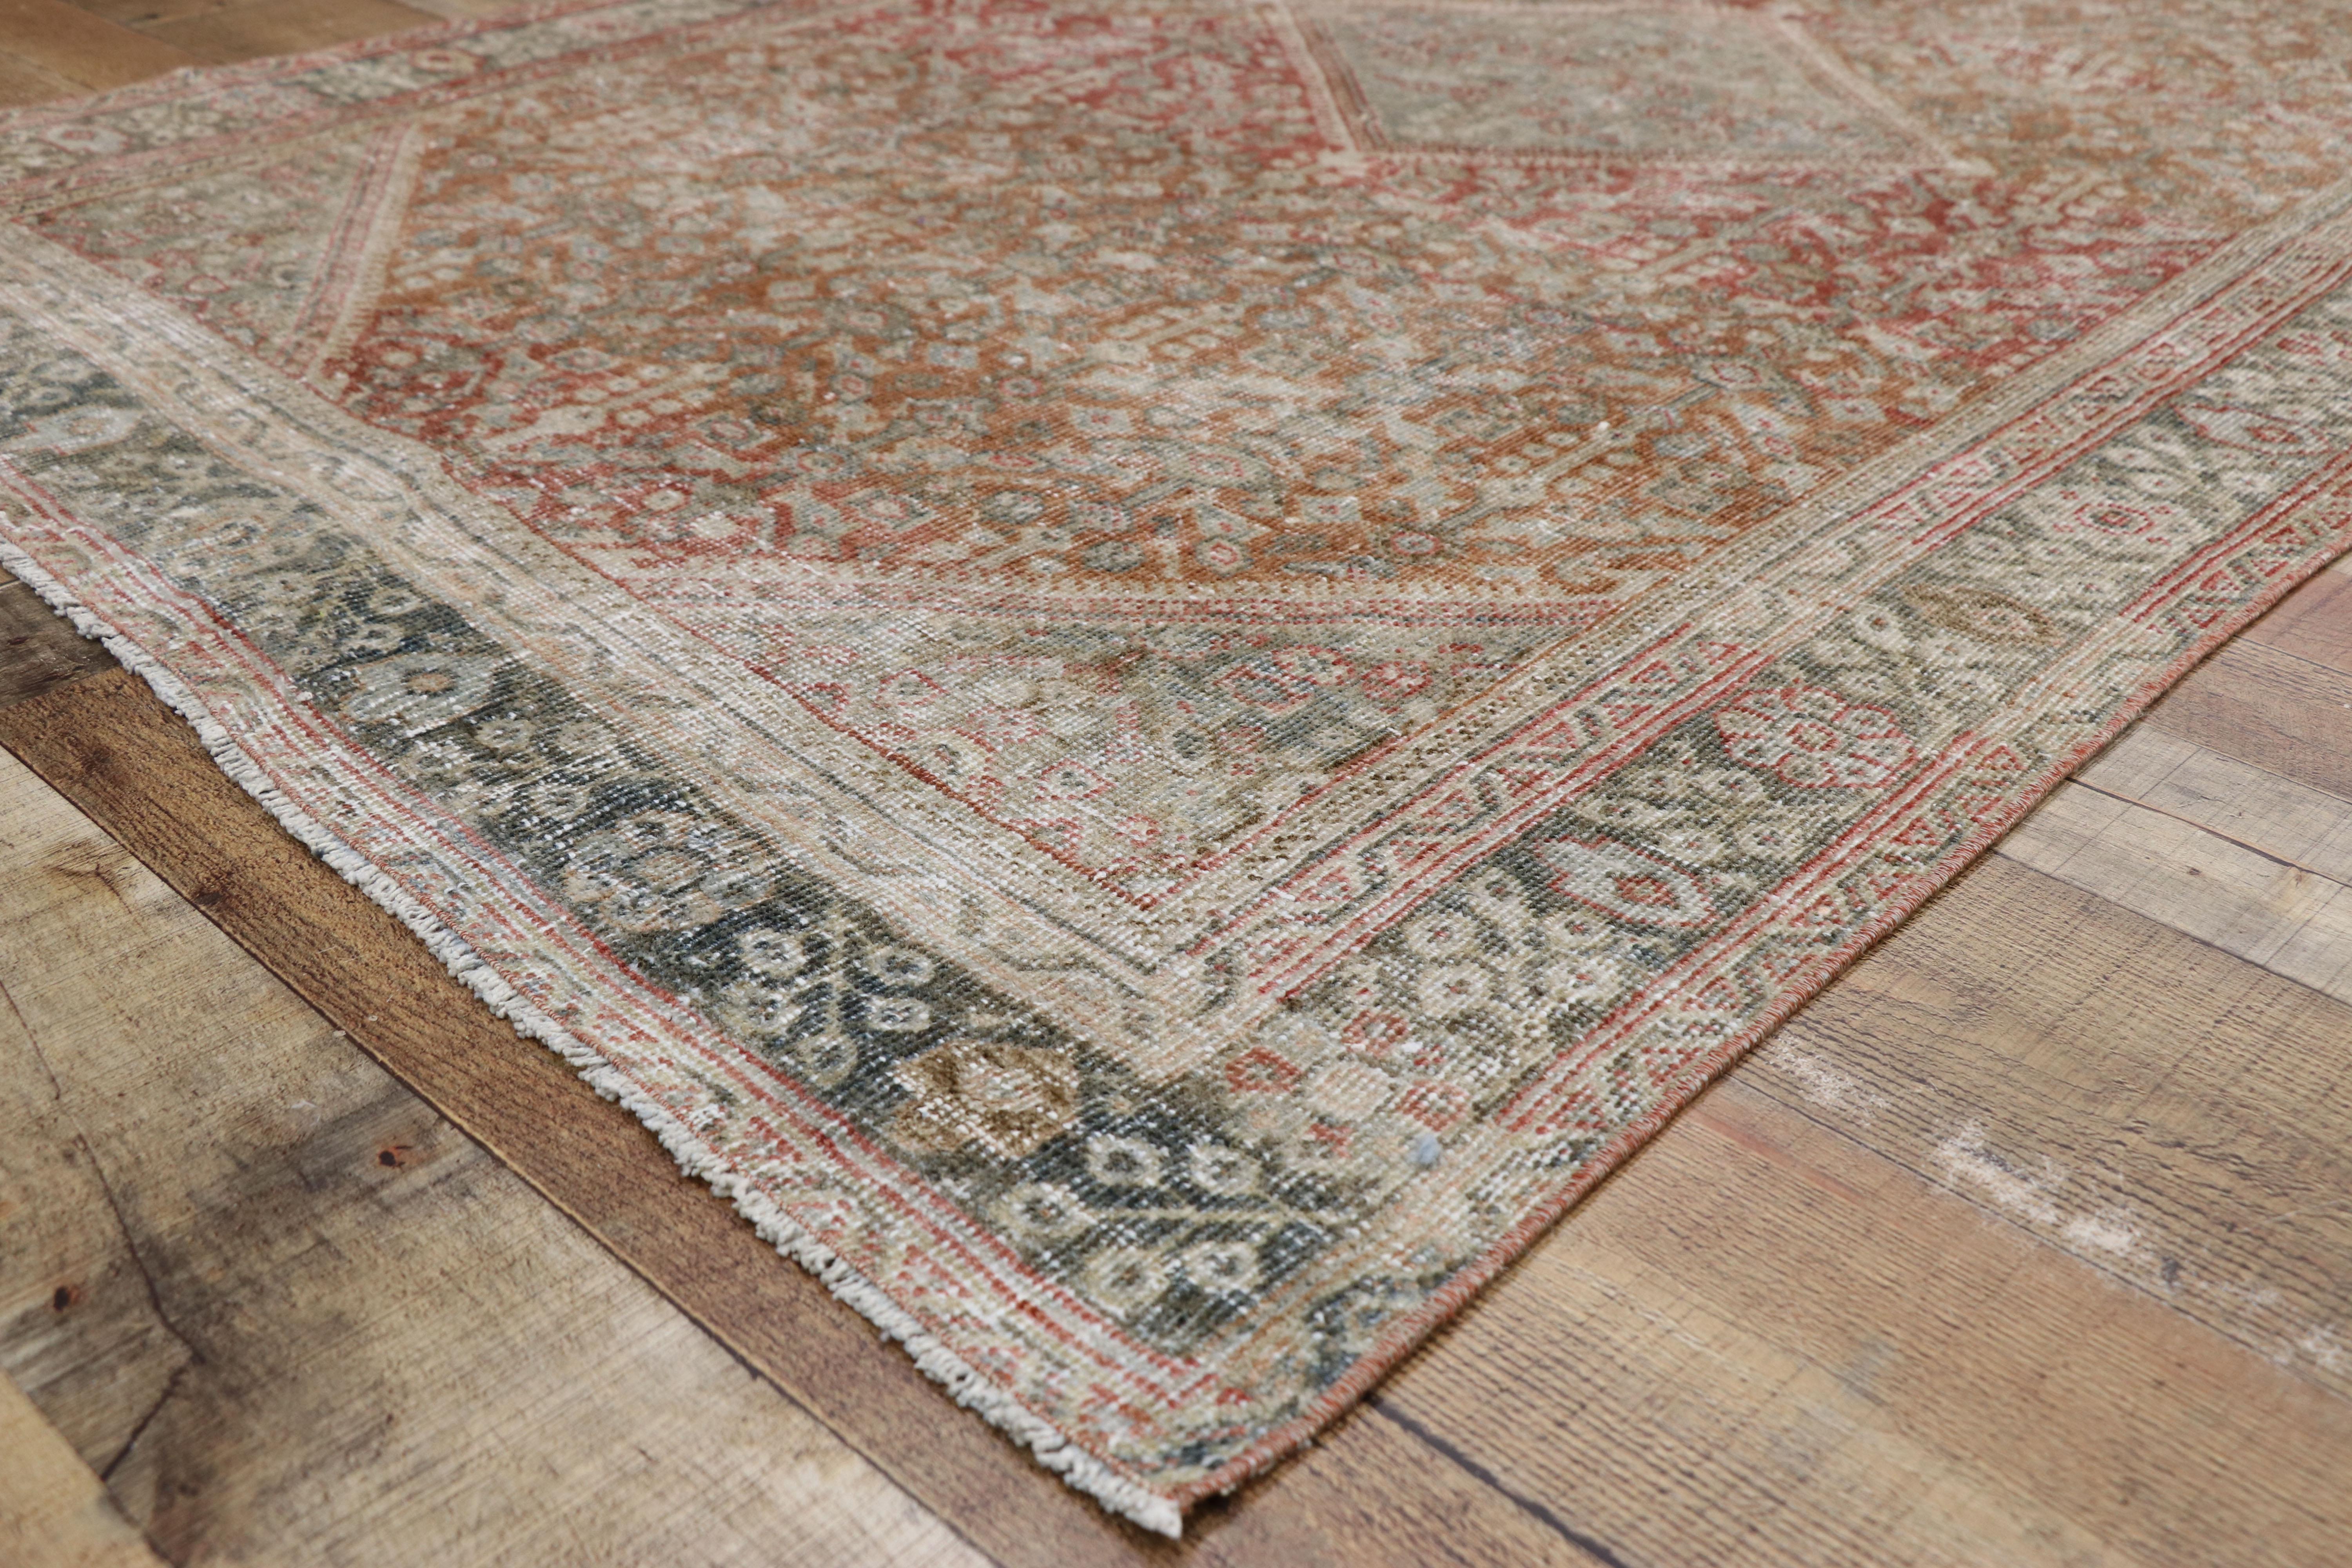 20th Century Distressed Antique Persian Mahal Design Rug with Modern Rustic Belgian Style